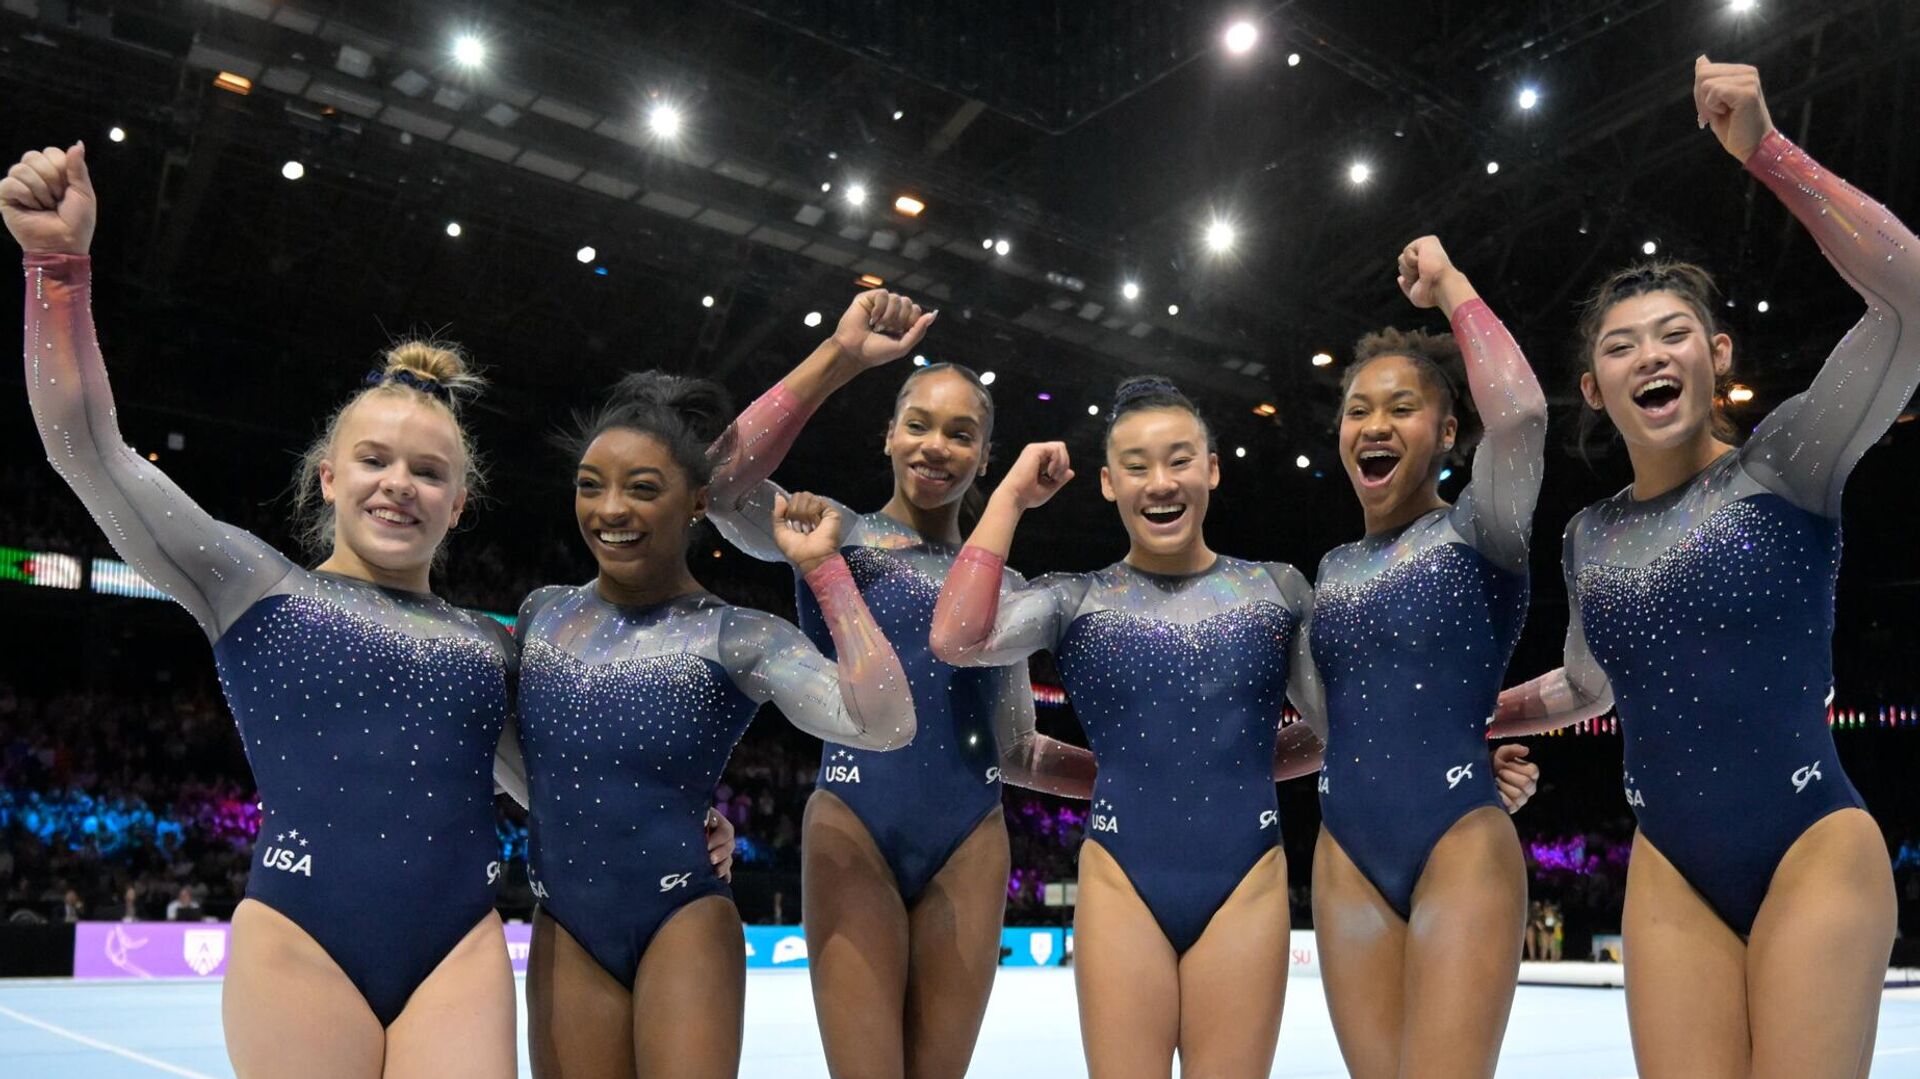 Team USA wins team championship gold at World Cup with Biles